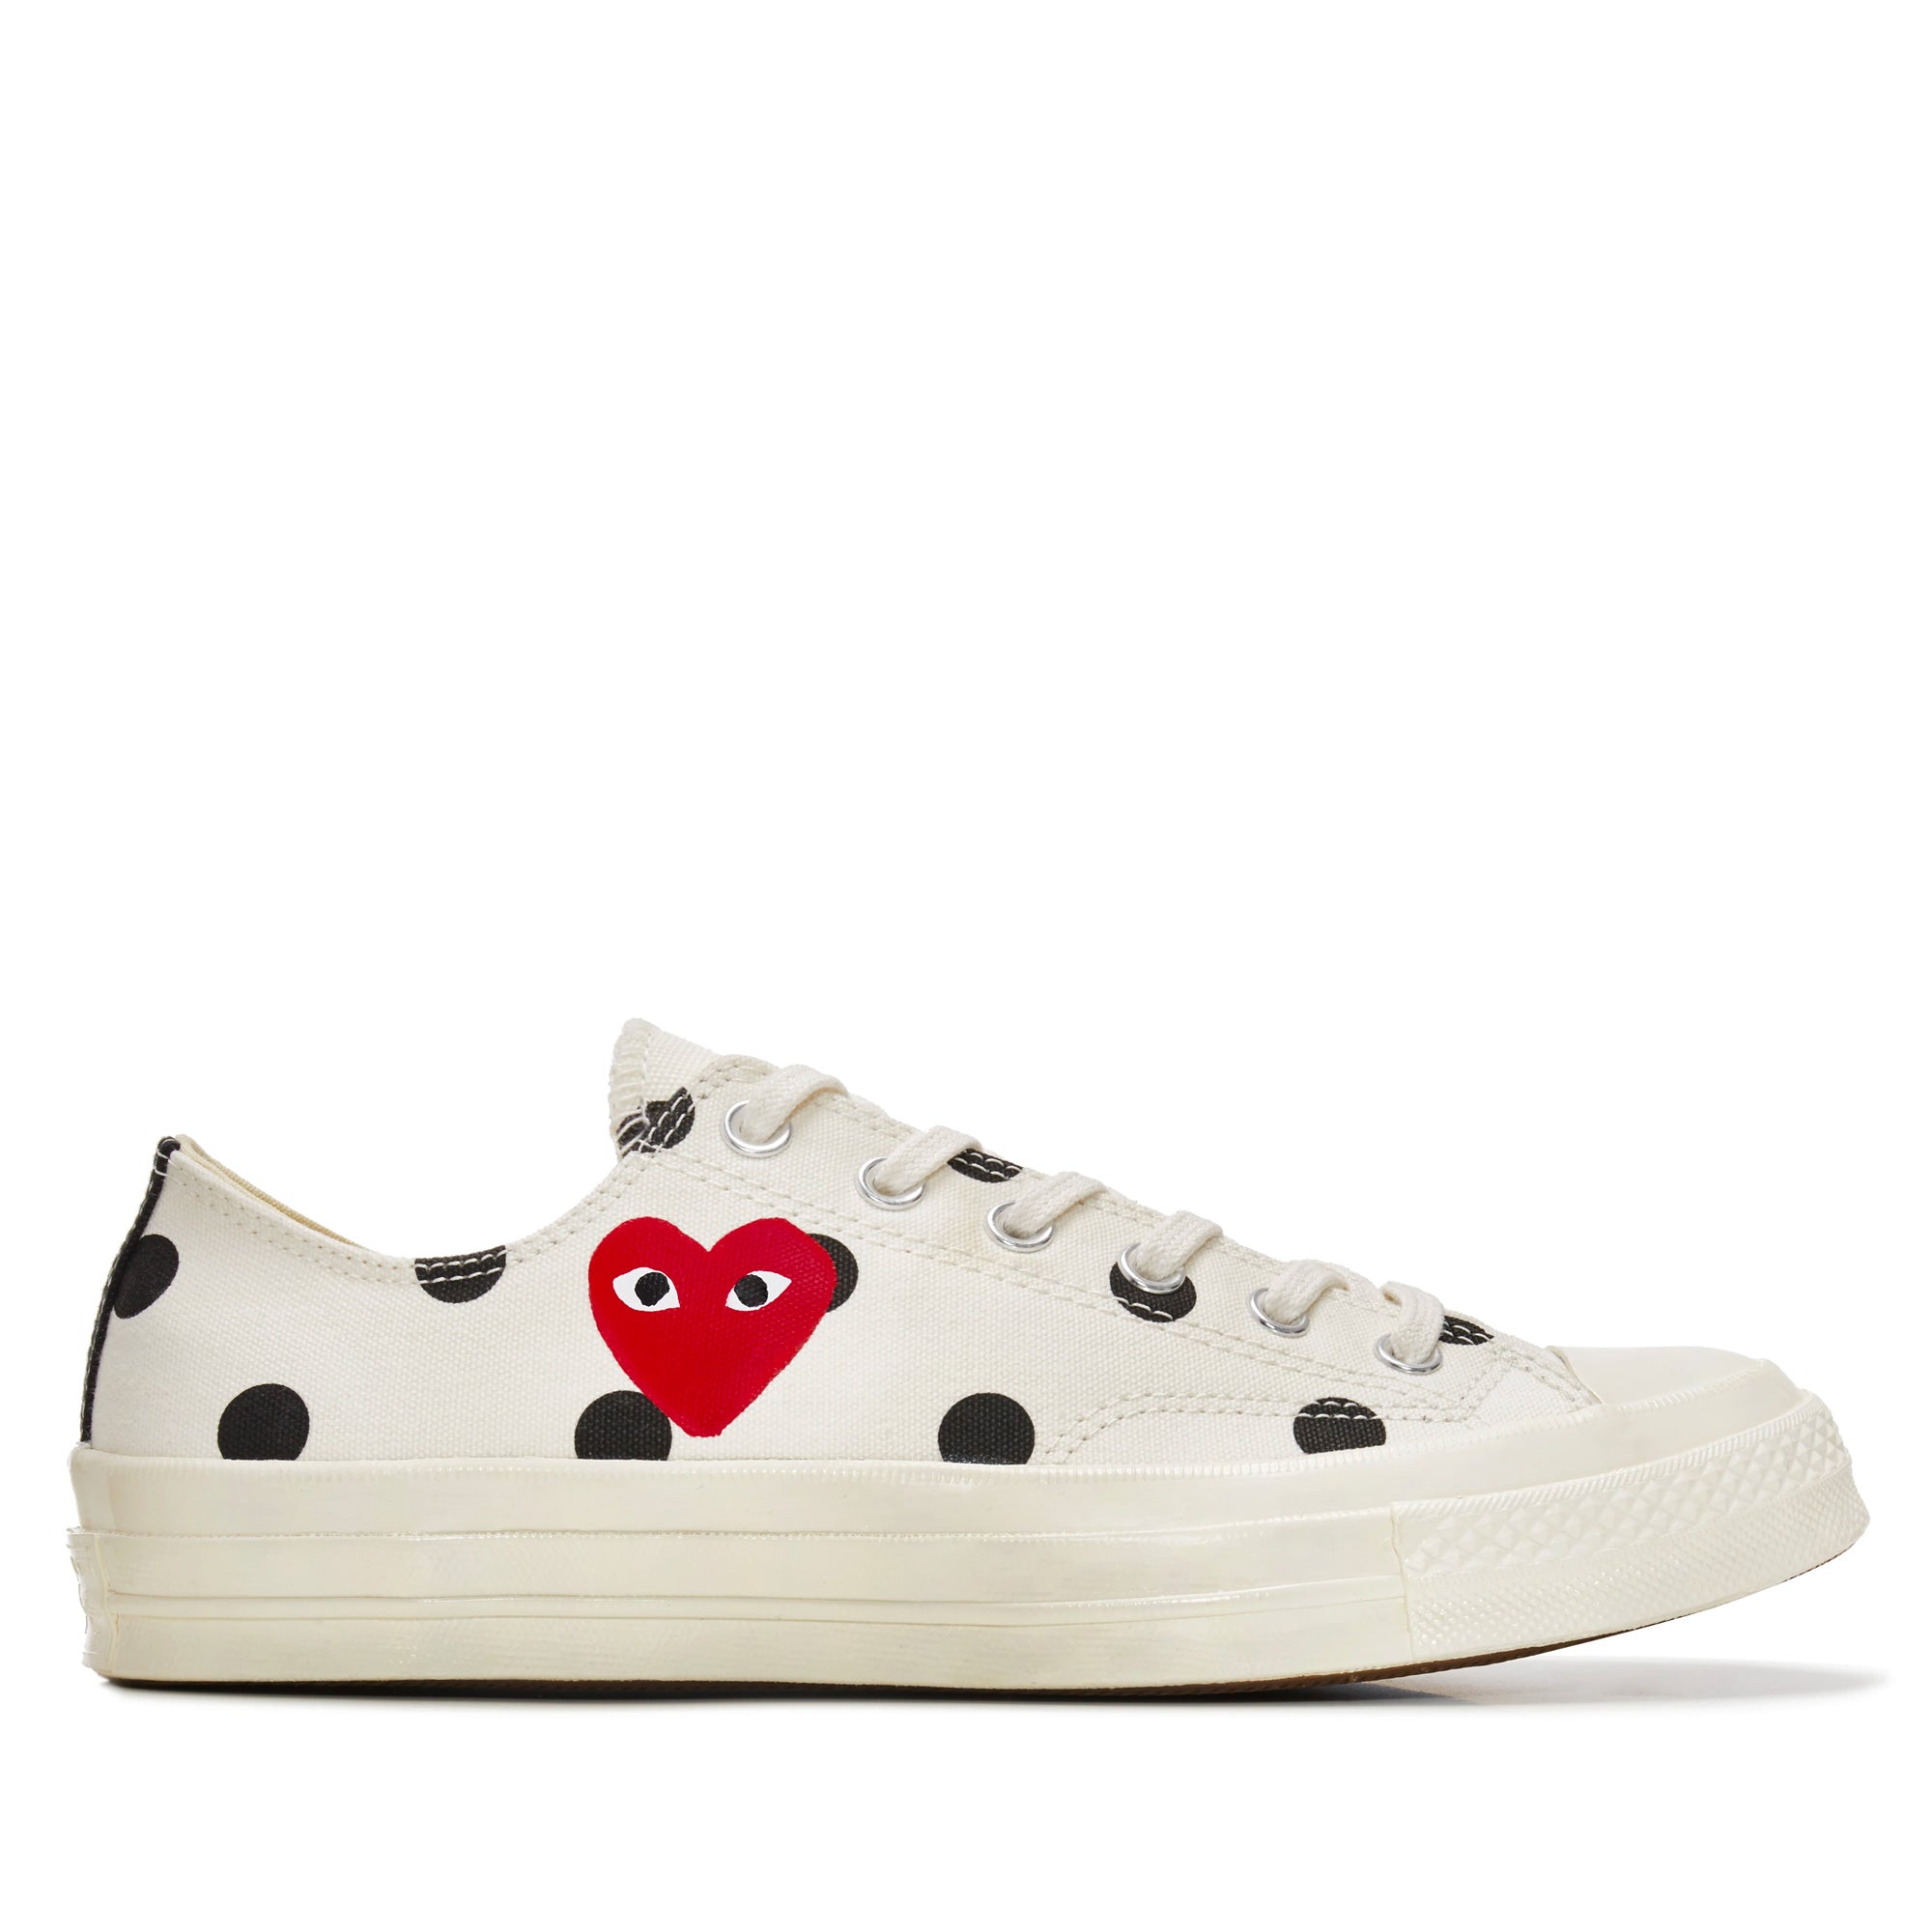 Play Converse - Polka Dot Red Heart Chuck Taylor All Star ’70 Low Sneakers - (White) view 1